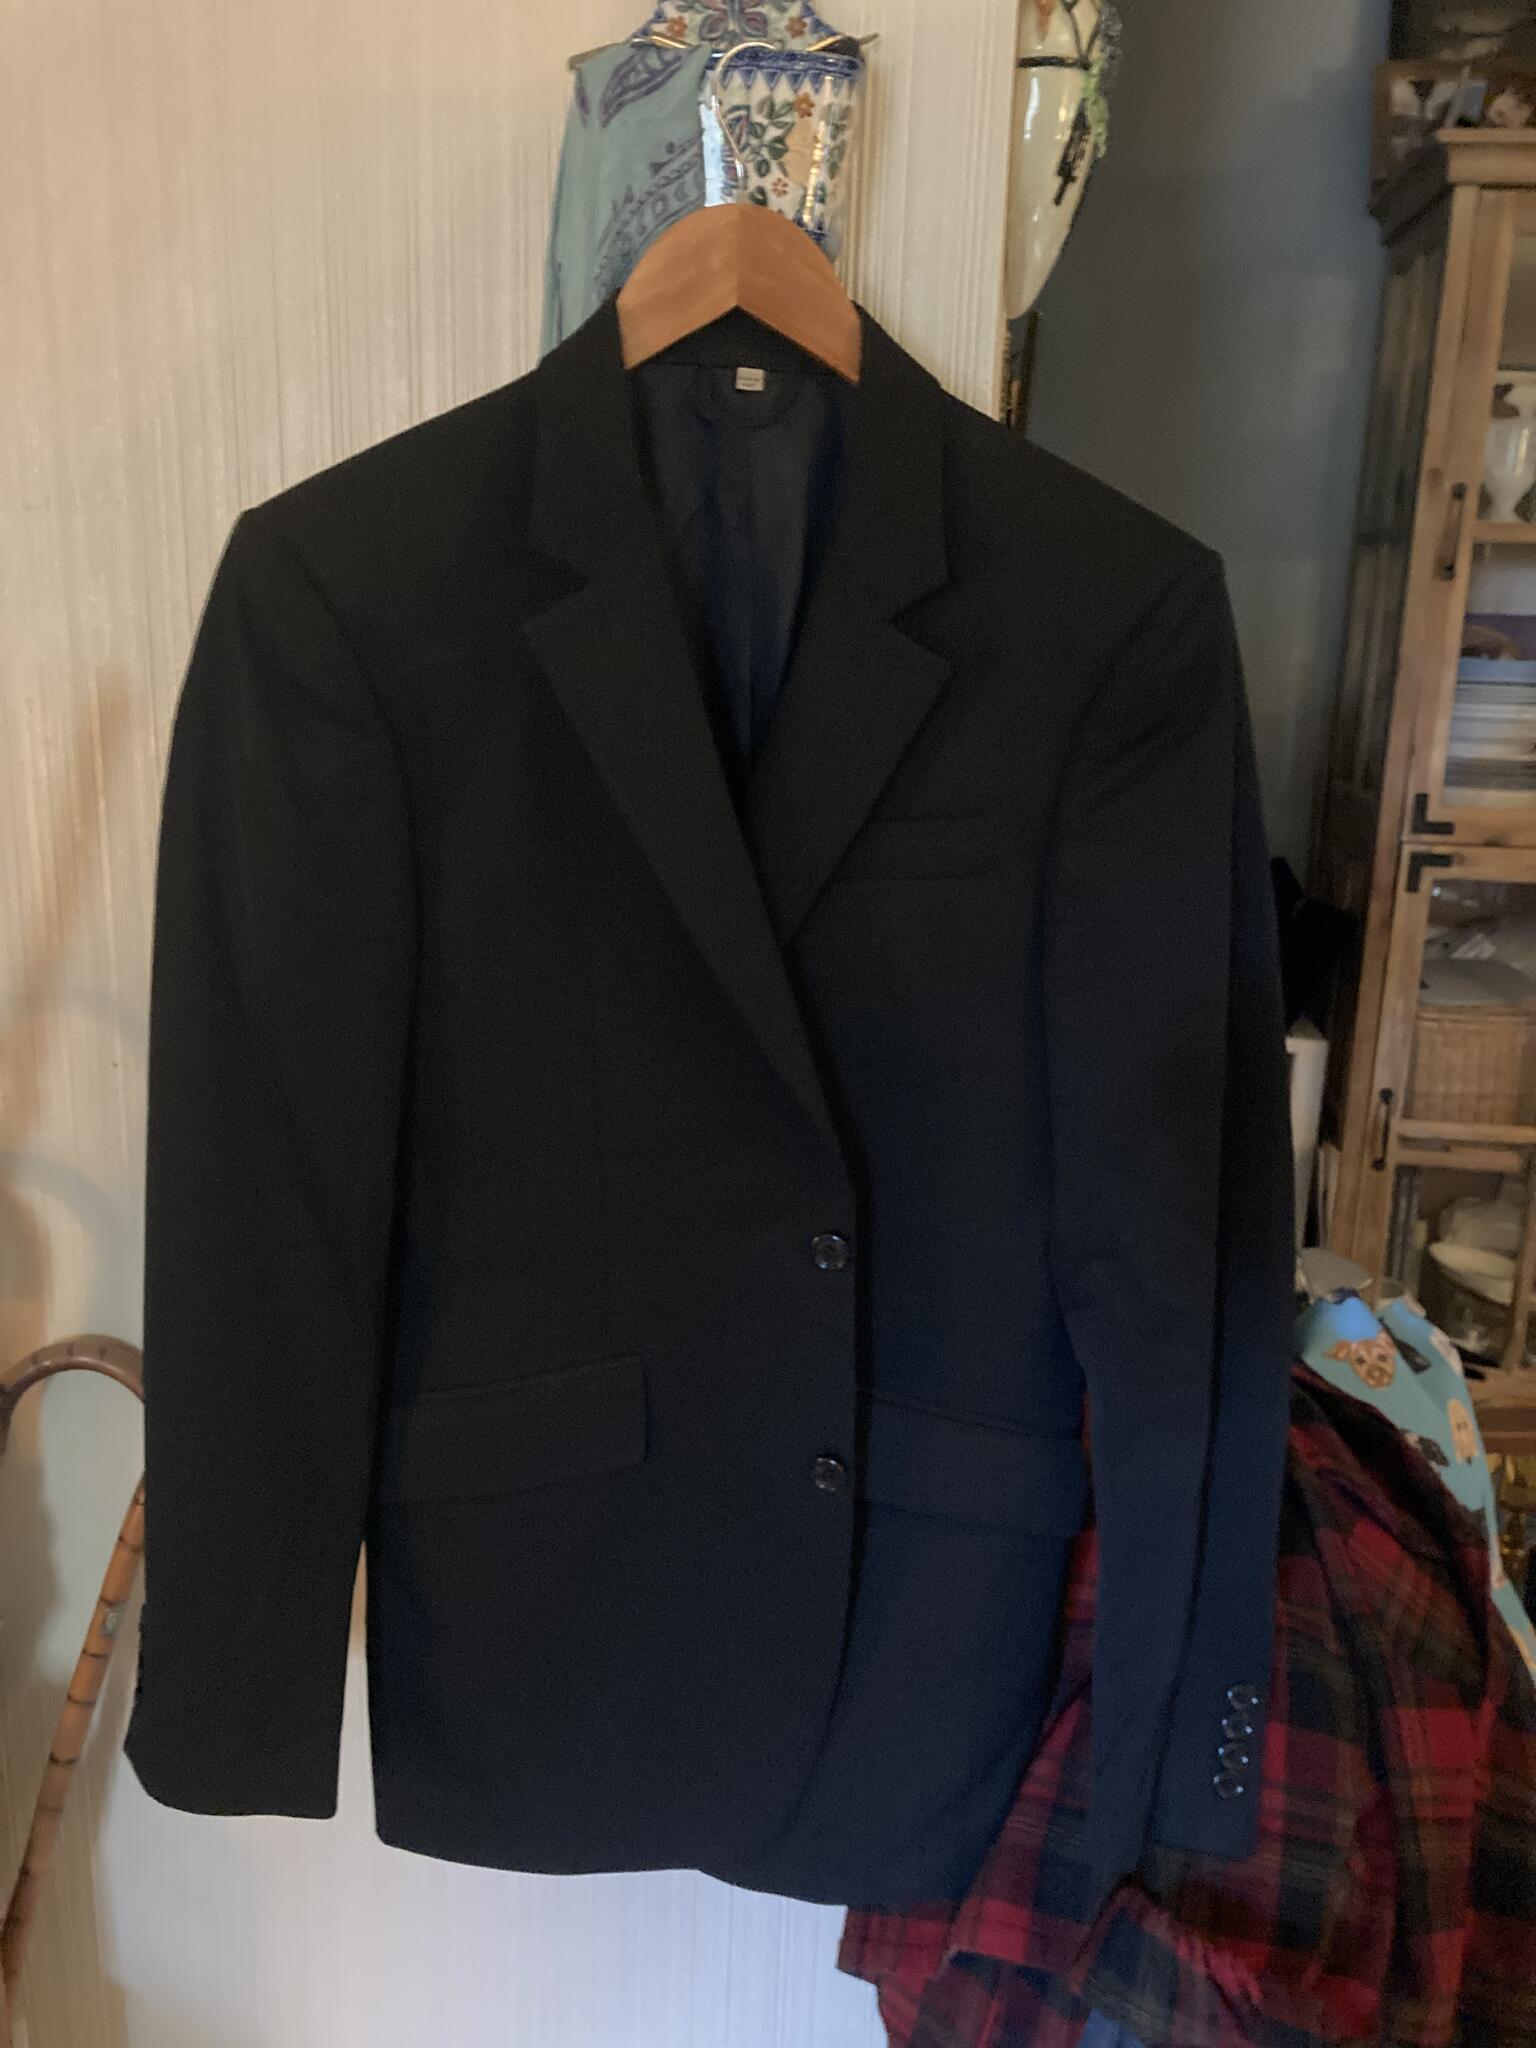 Burberry Men's Wool Blazer Black, Made in Italy, from London store for ...